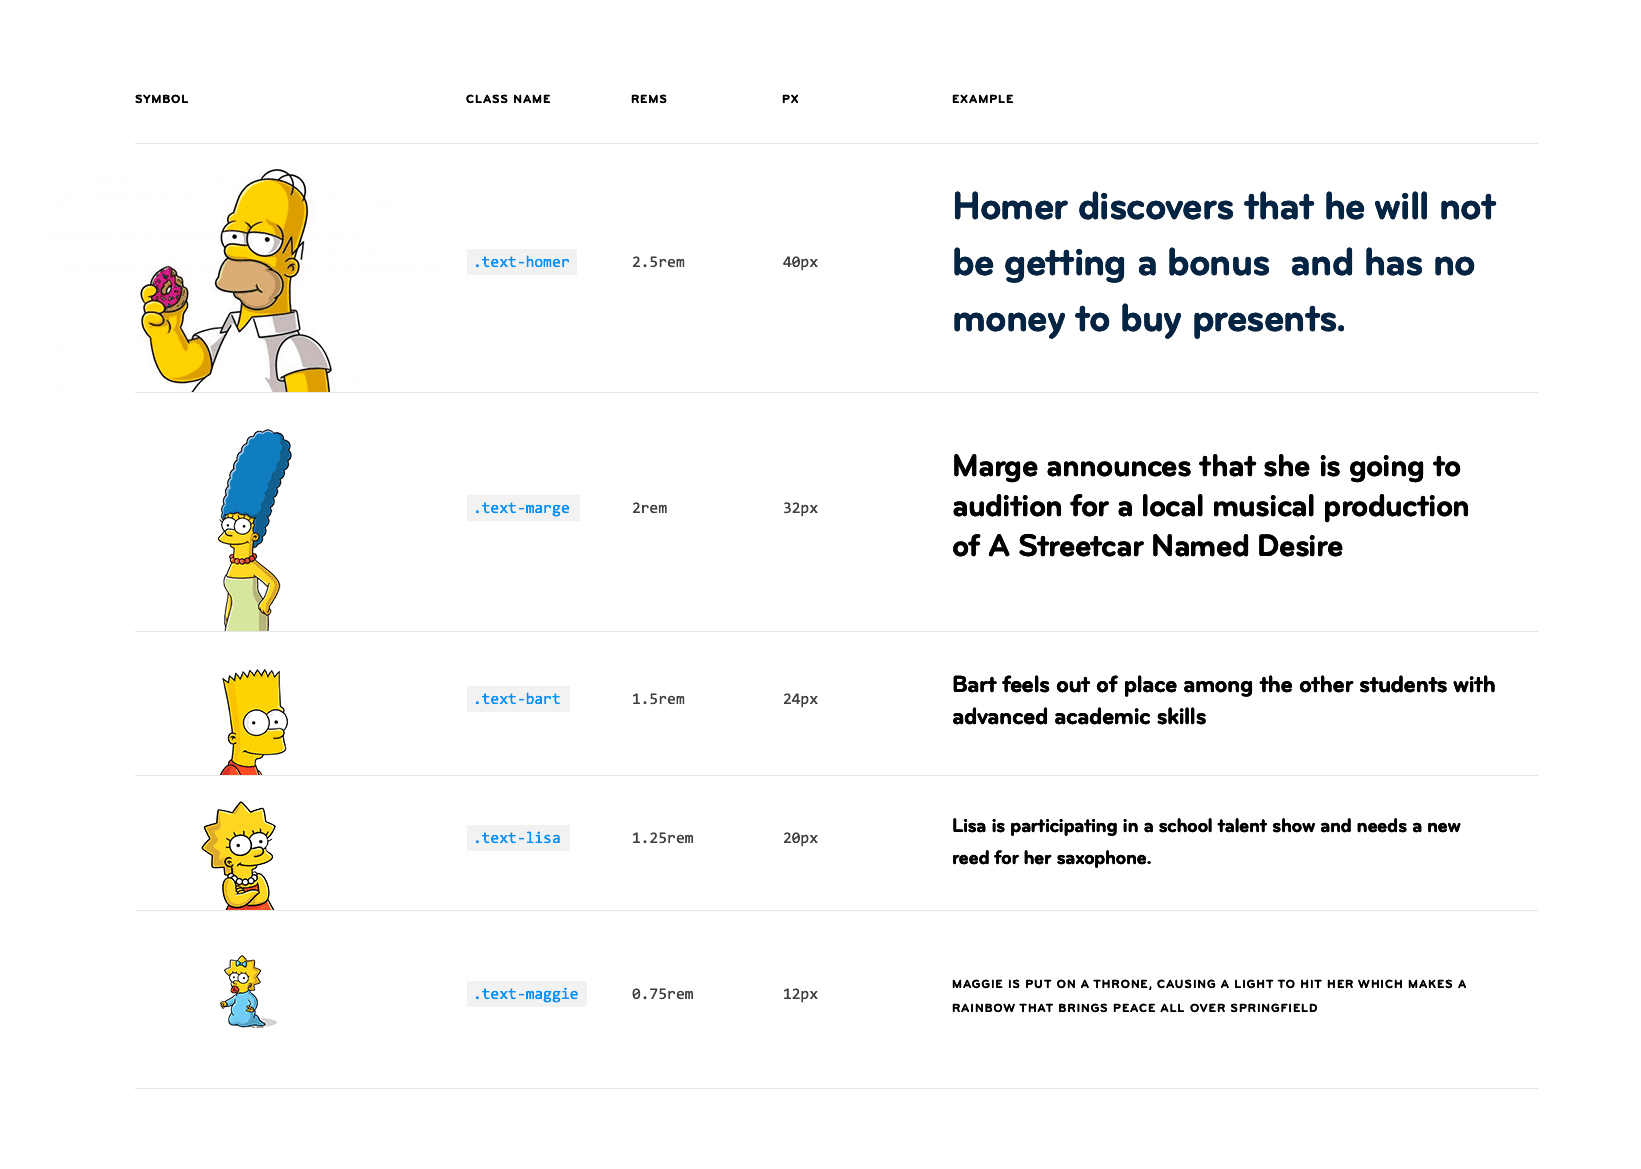 Tying typography styles to Simpsons characters